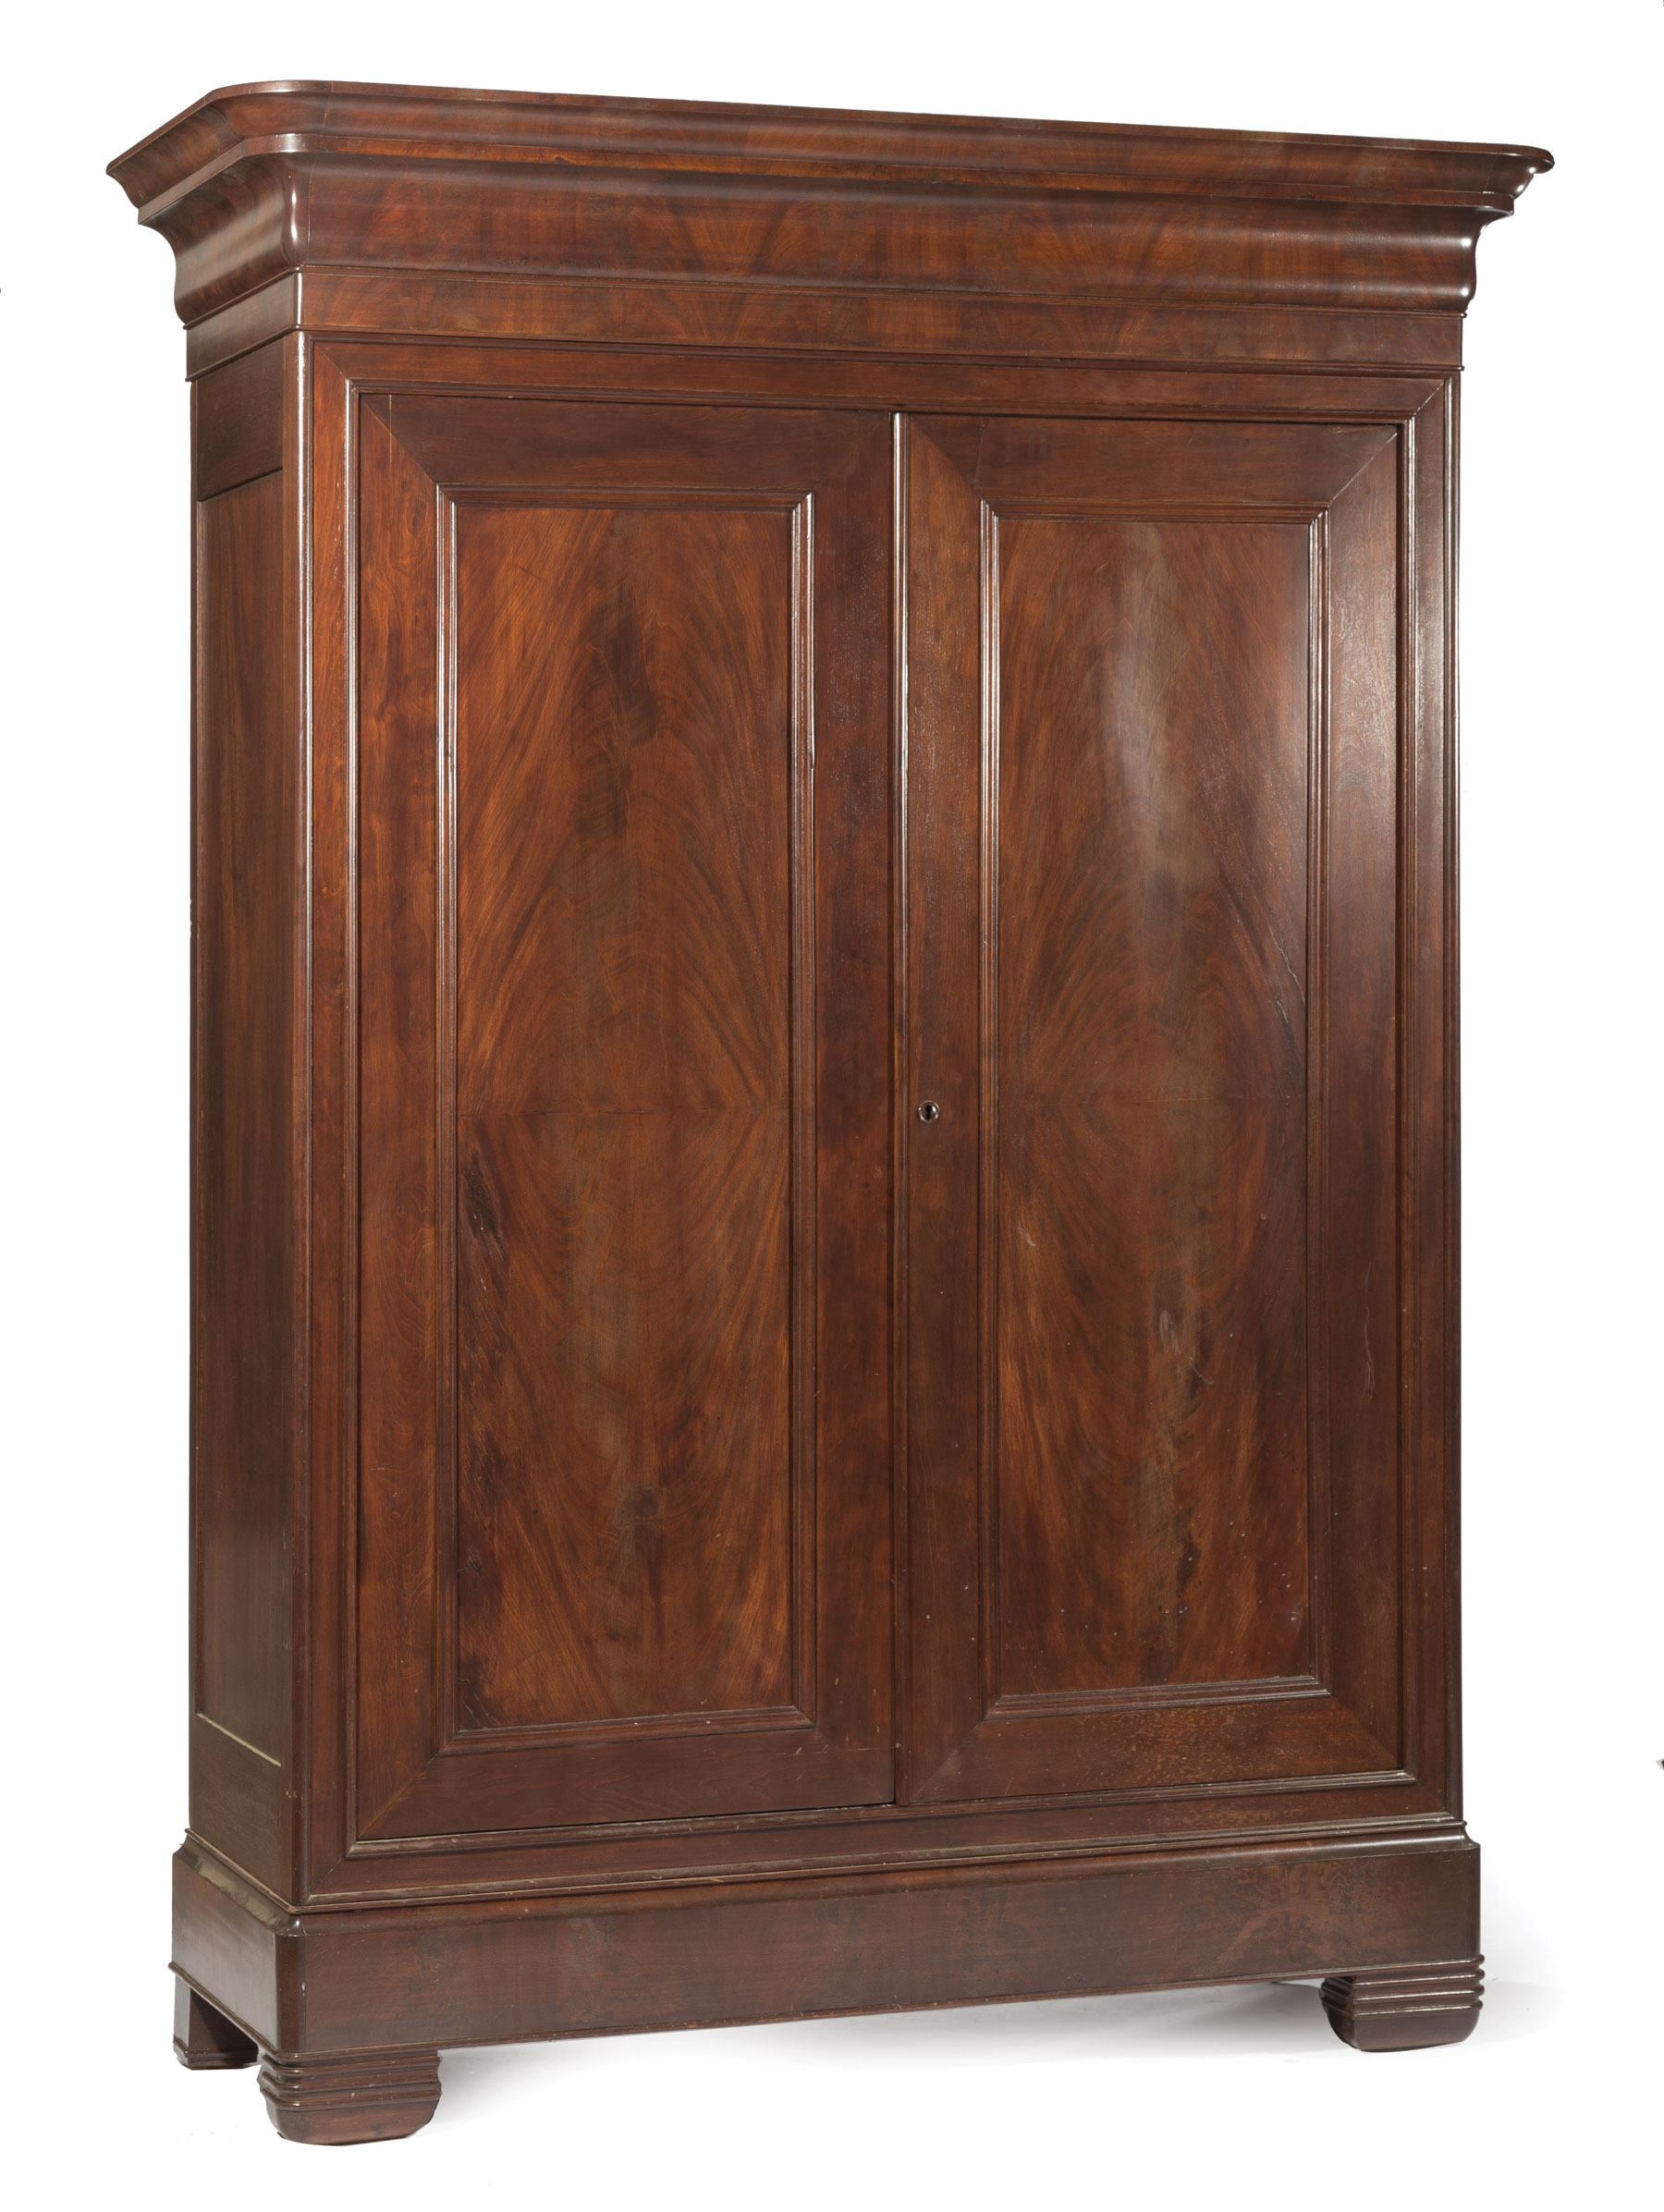 Louisiana Figured Mahogany Armoire , mid-19th c., stepped ogee cornice, molded bookmatched door